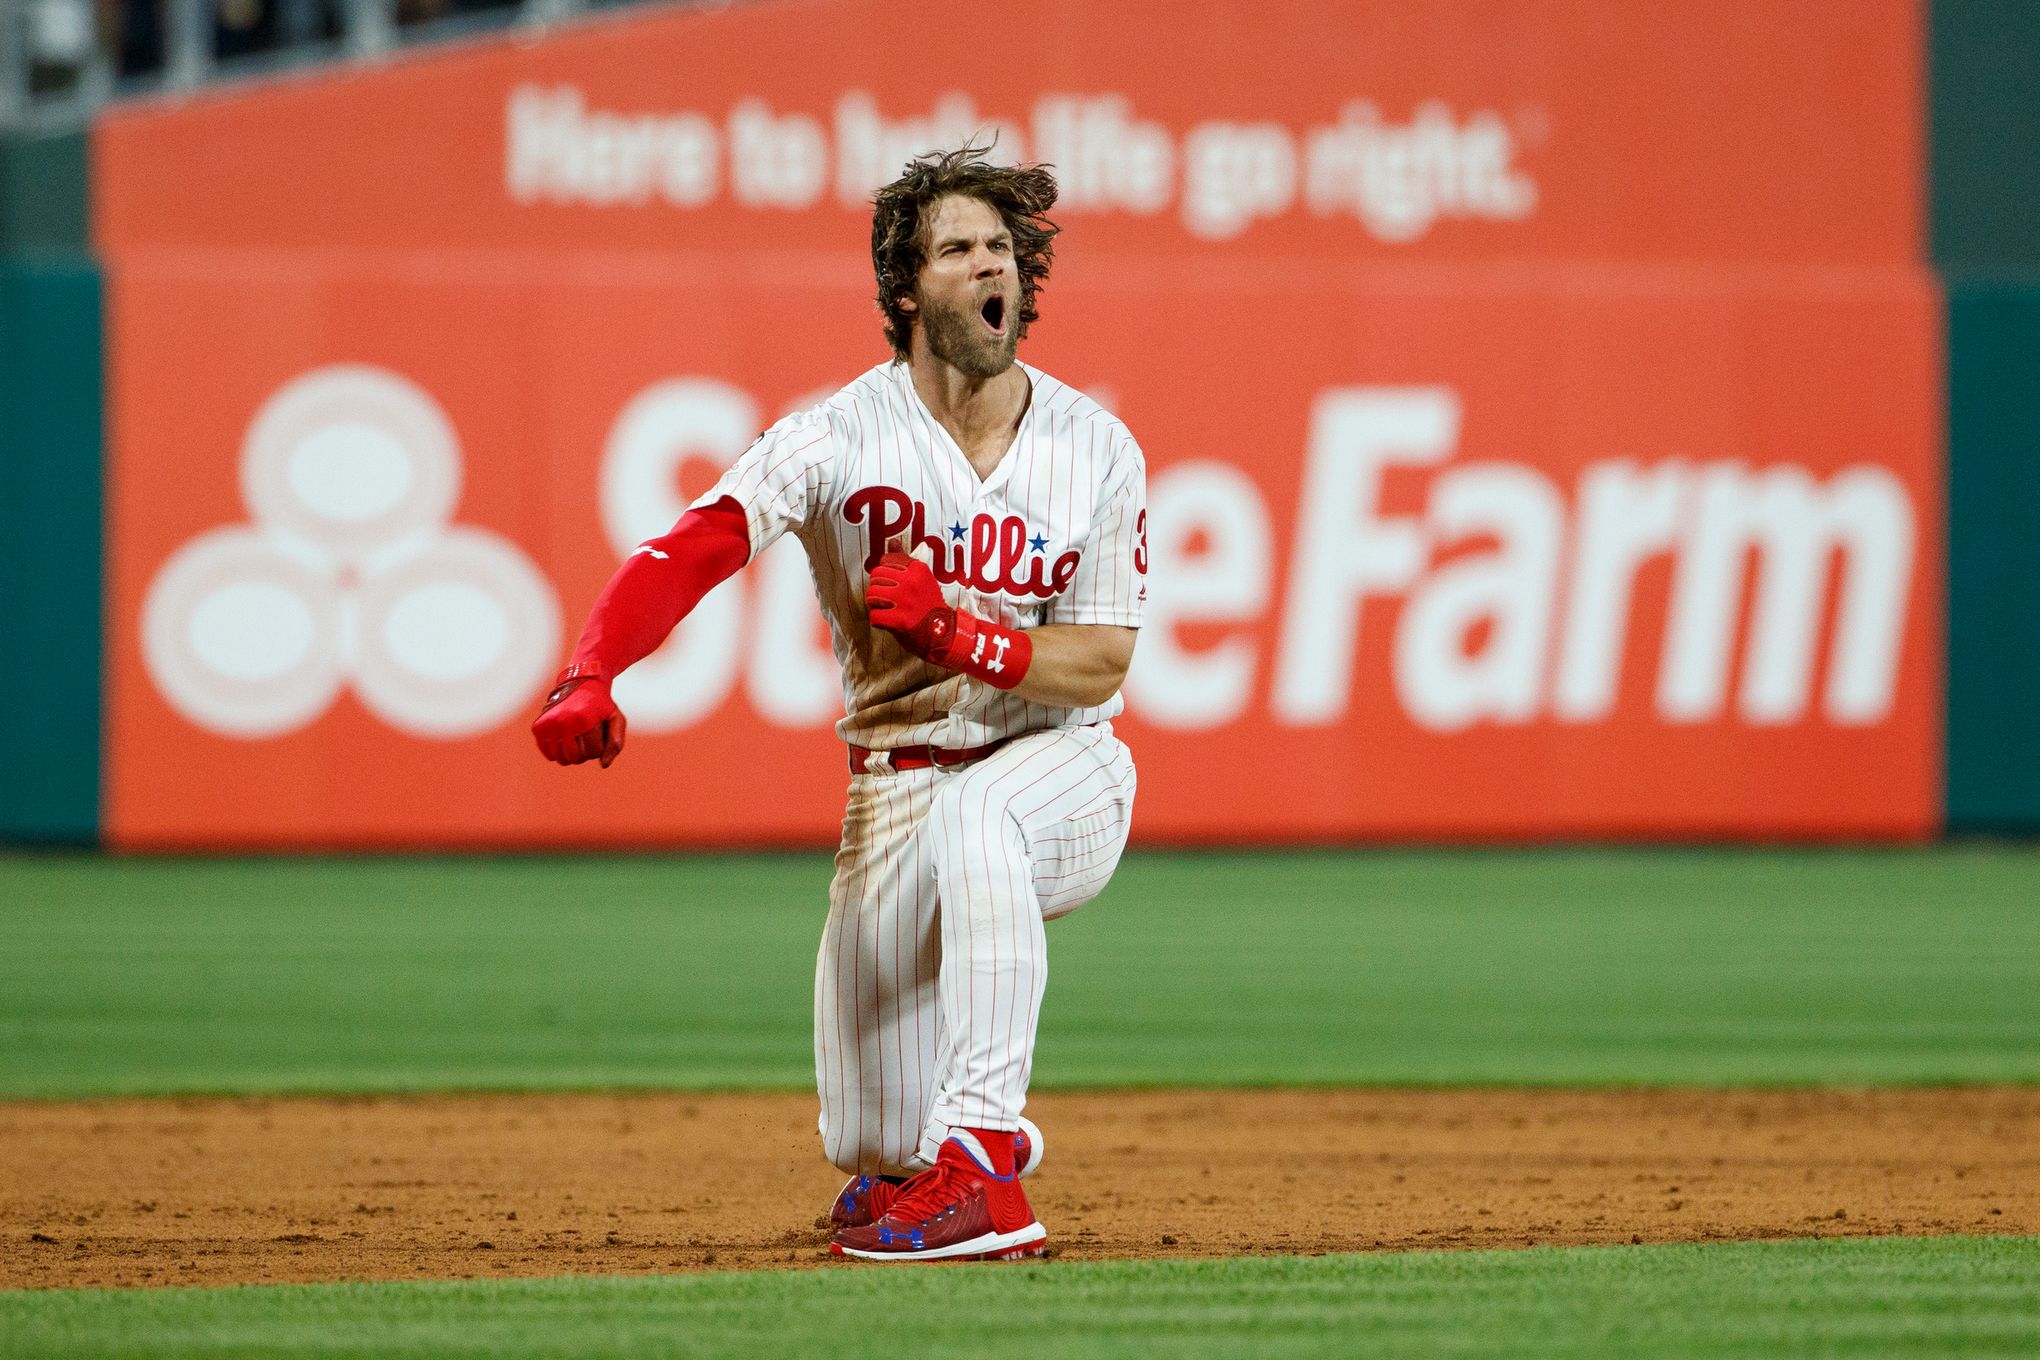 Only Phillies Player Who Can Hit Benched for Not Hustling